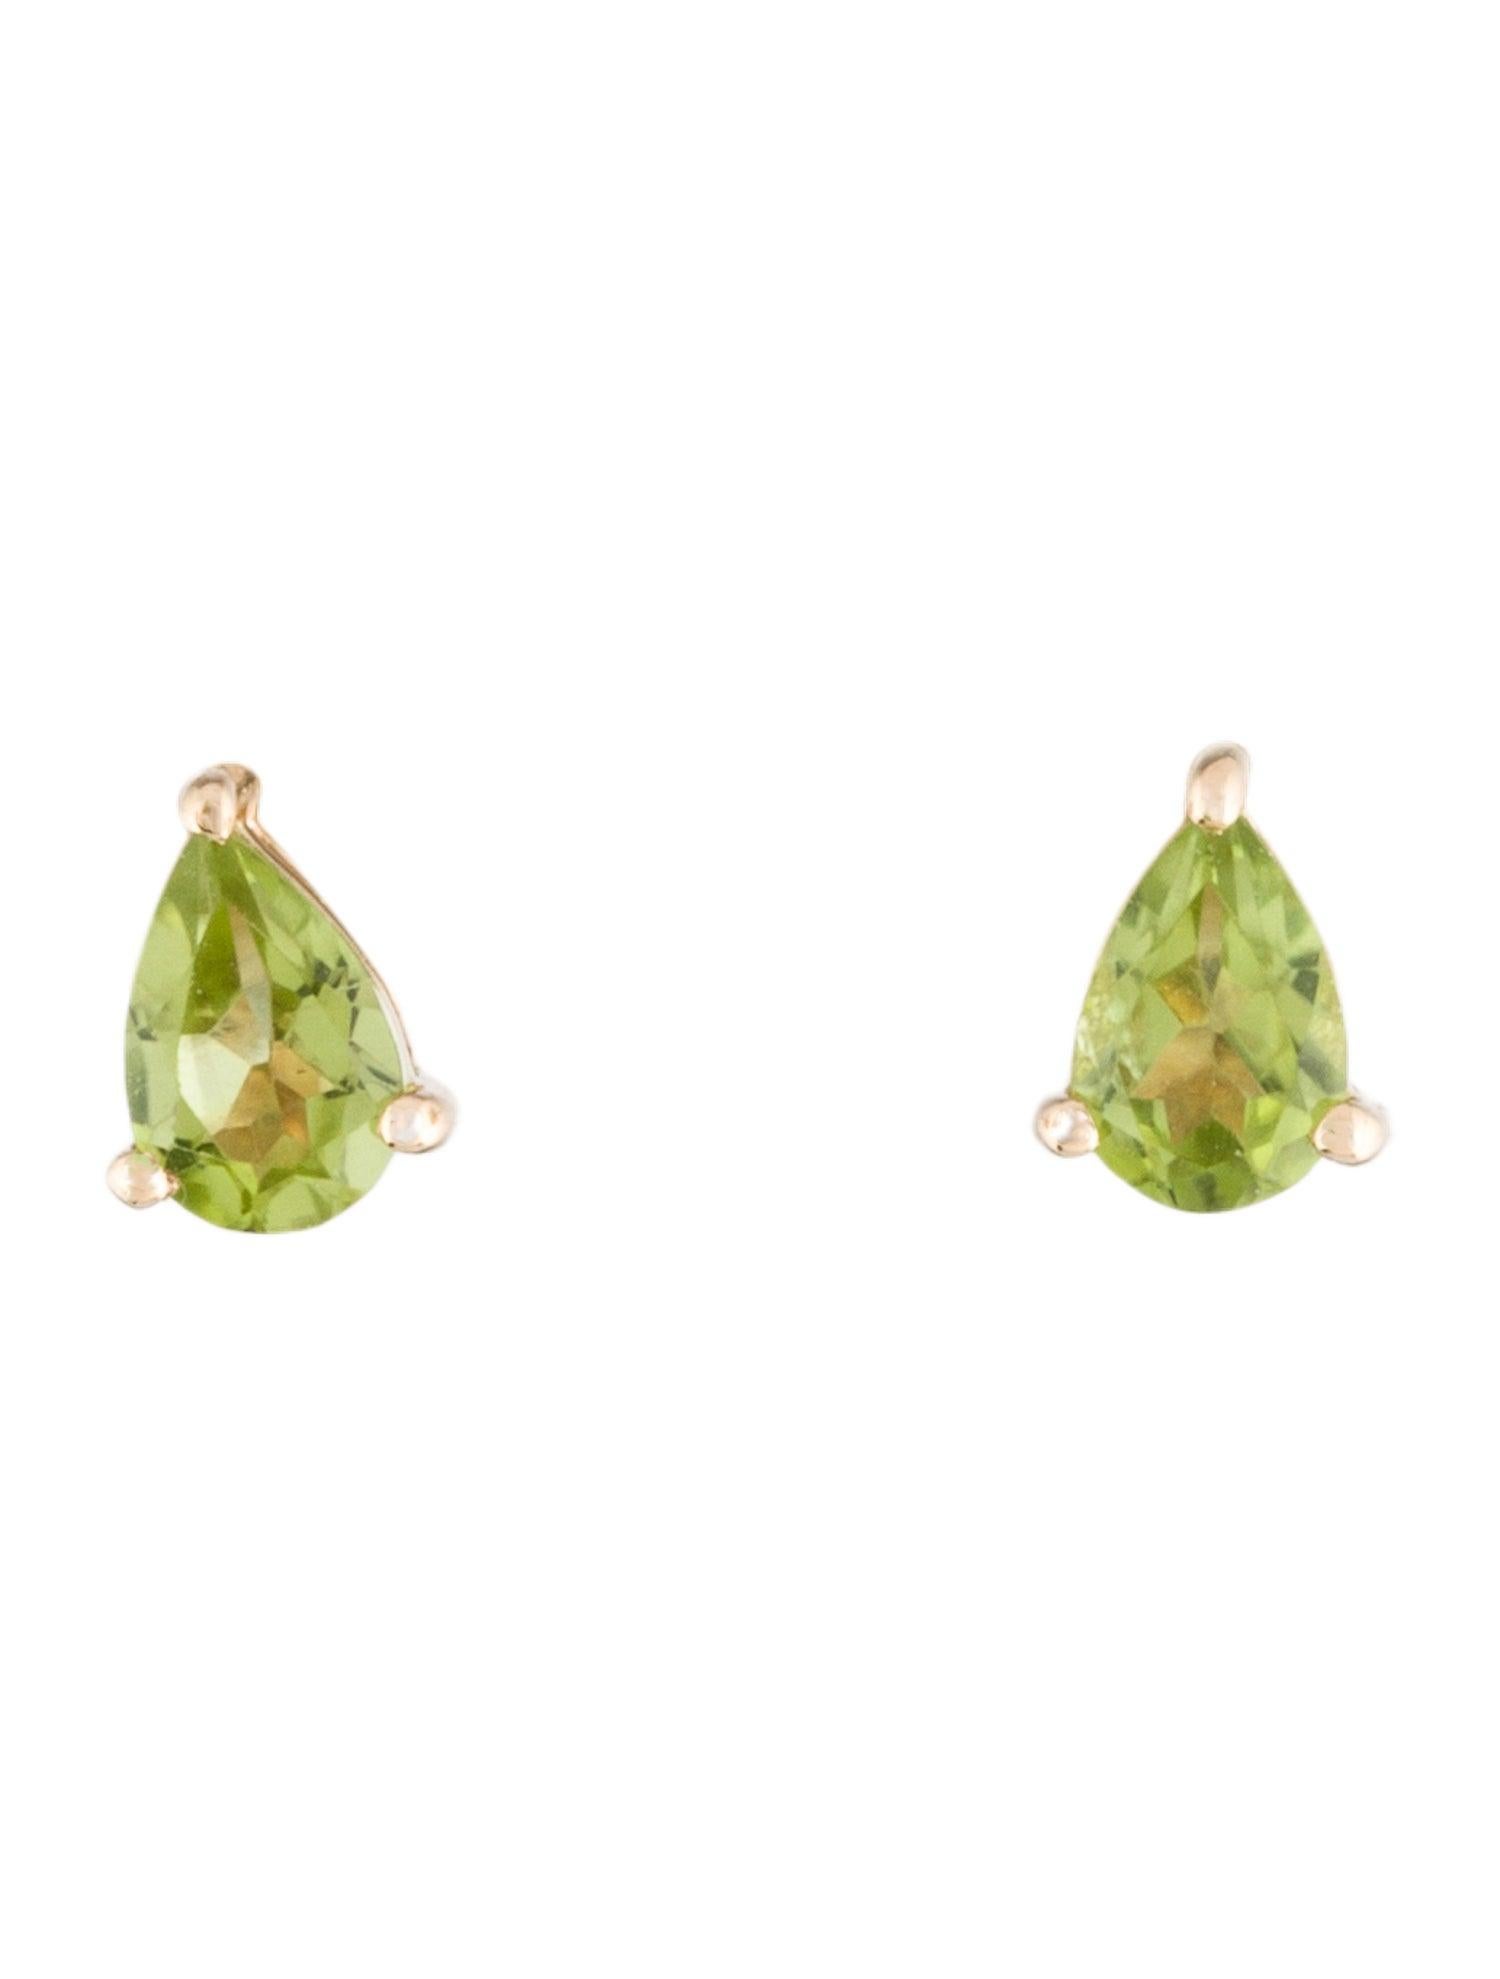 Introducing our captivating 14K Yellow Gold Stud Earrings, each featuring a pear-shaped modified brilliant Peridot, set to showcase the gemstone's vibrant green hue and exquisite brilliance. These earrings, crafted with precision, meld the timeless